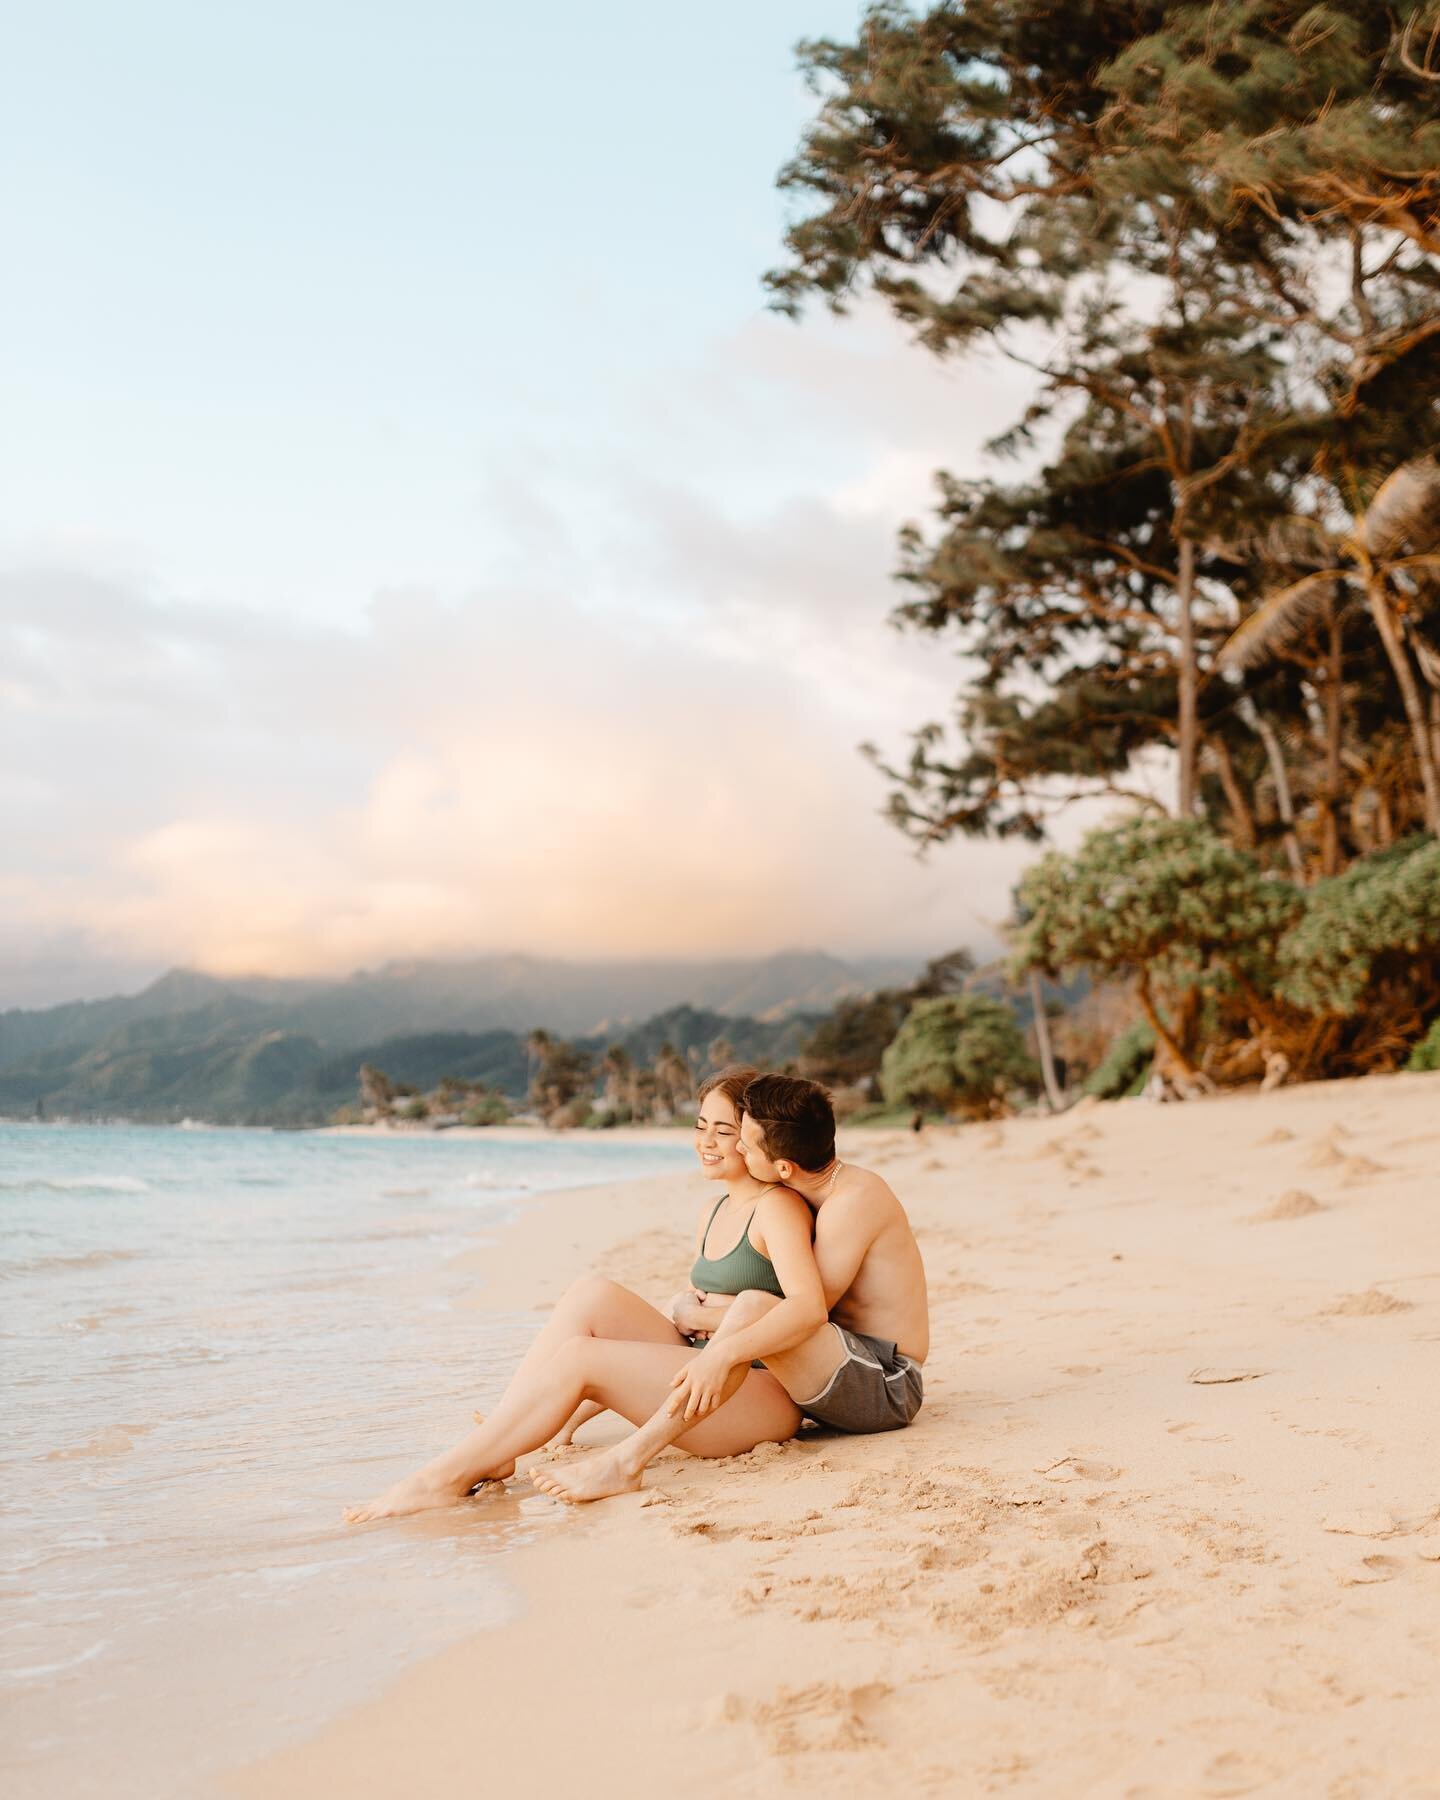 ALOHA! 🌺 We are back from Hawaii and feeling so recharged! ✨ All I&rsquo;m going to say is if you are considering getting married in Hawaii, take me with you and let&rsquo;s get some magical photos!!! 😍😘